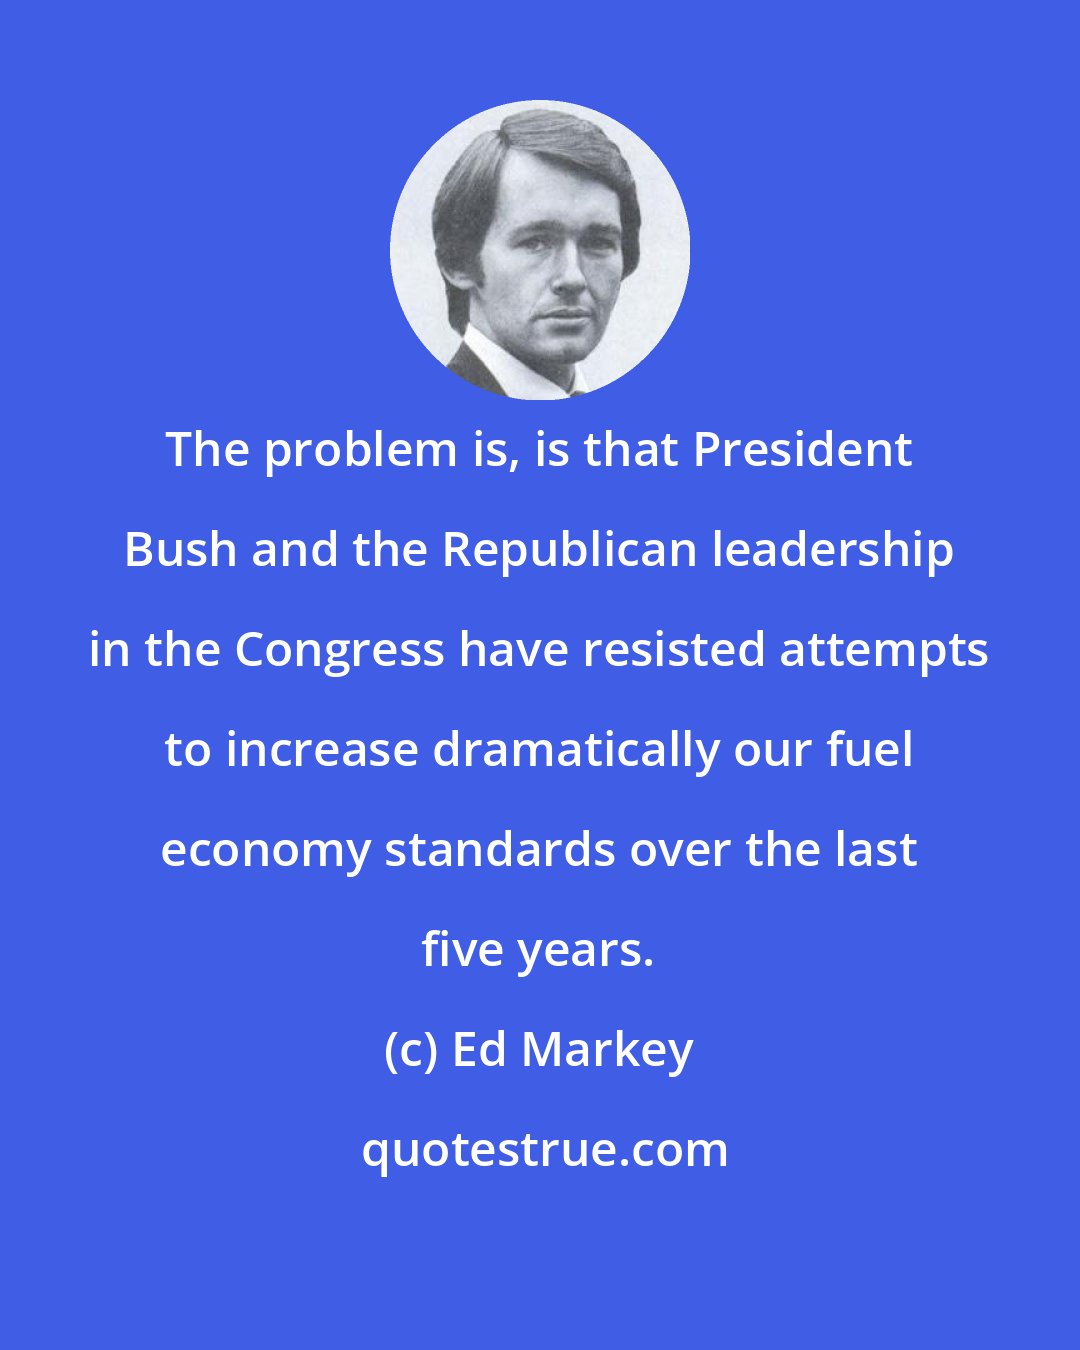 Ed Markey: The problem is, is that President Bush and the Republican leadership in the Congress have resisted attempts to increase dramatically our fuel economy standards over the last five years.